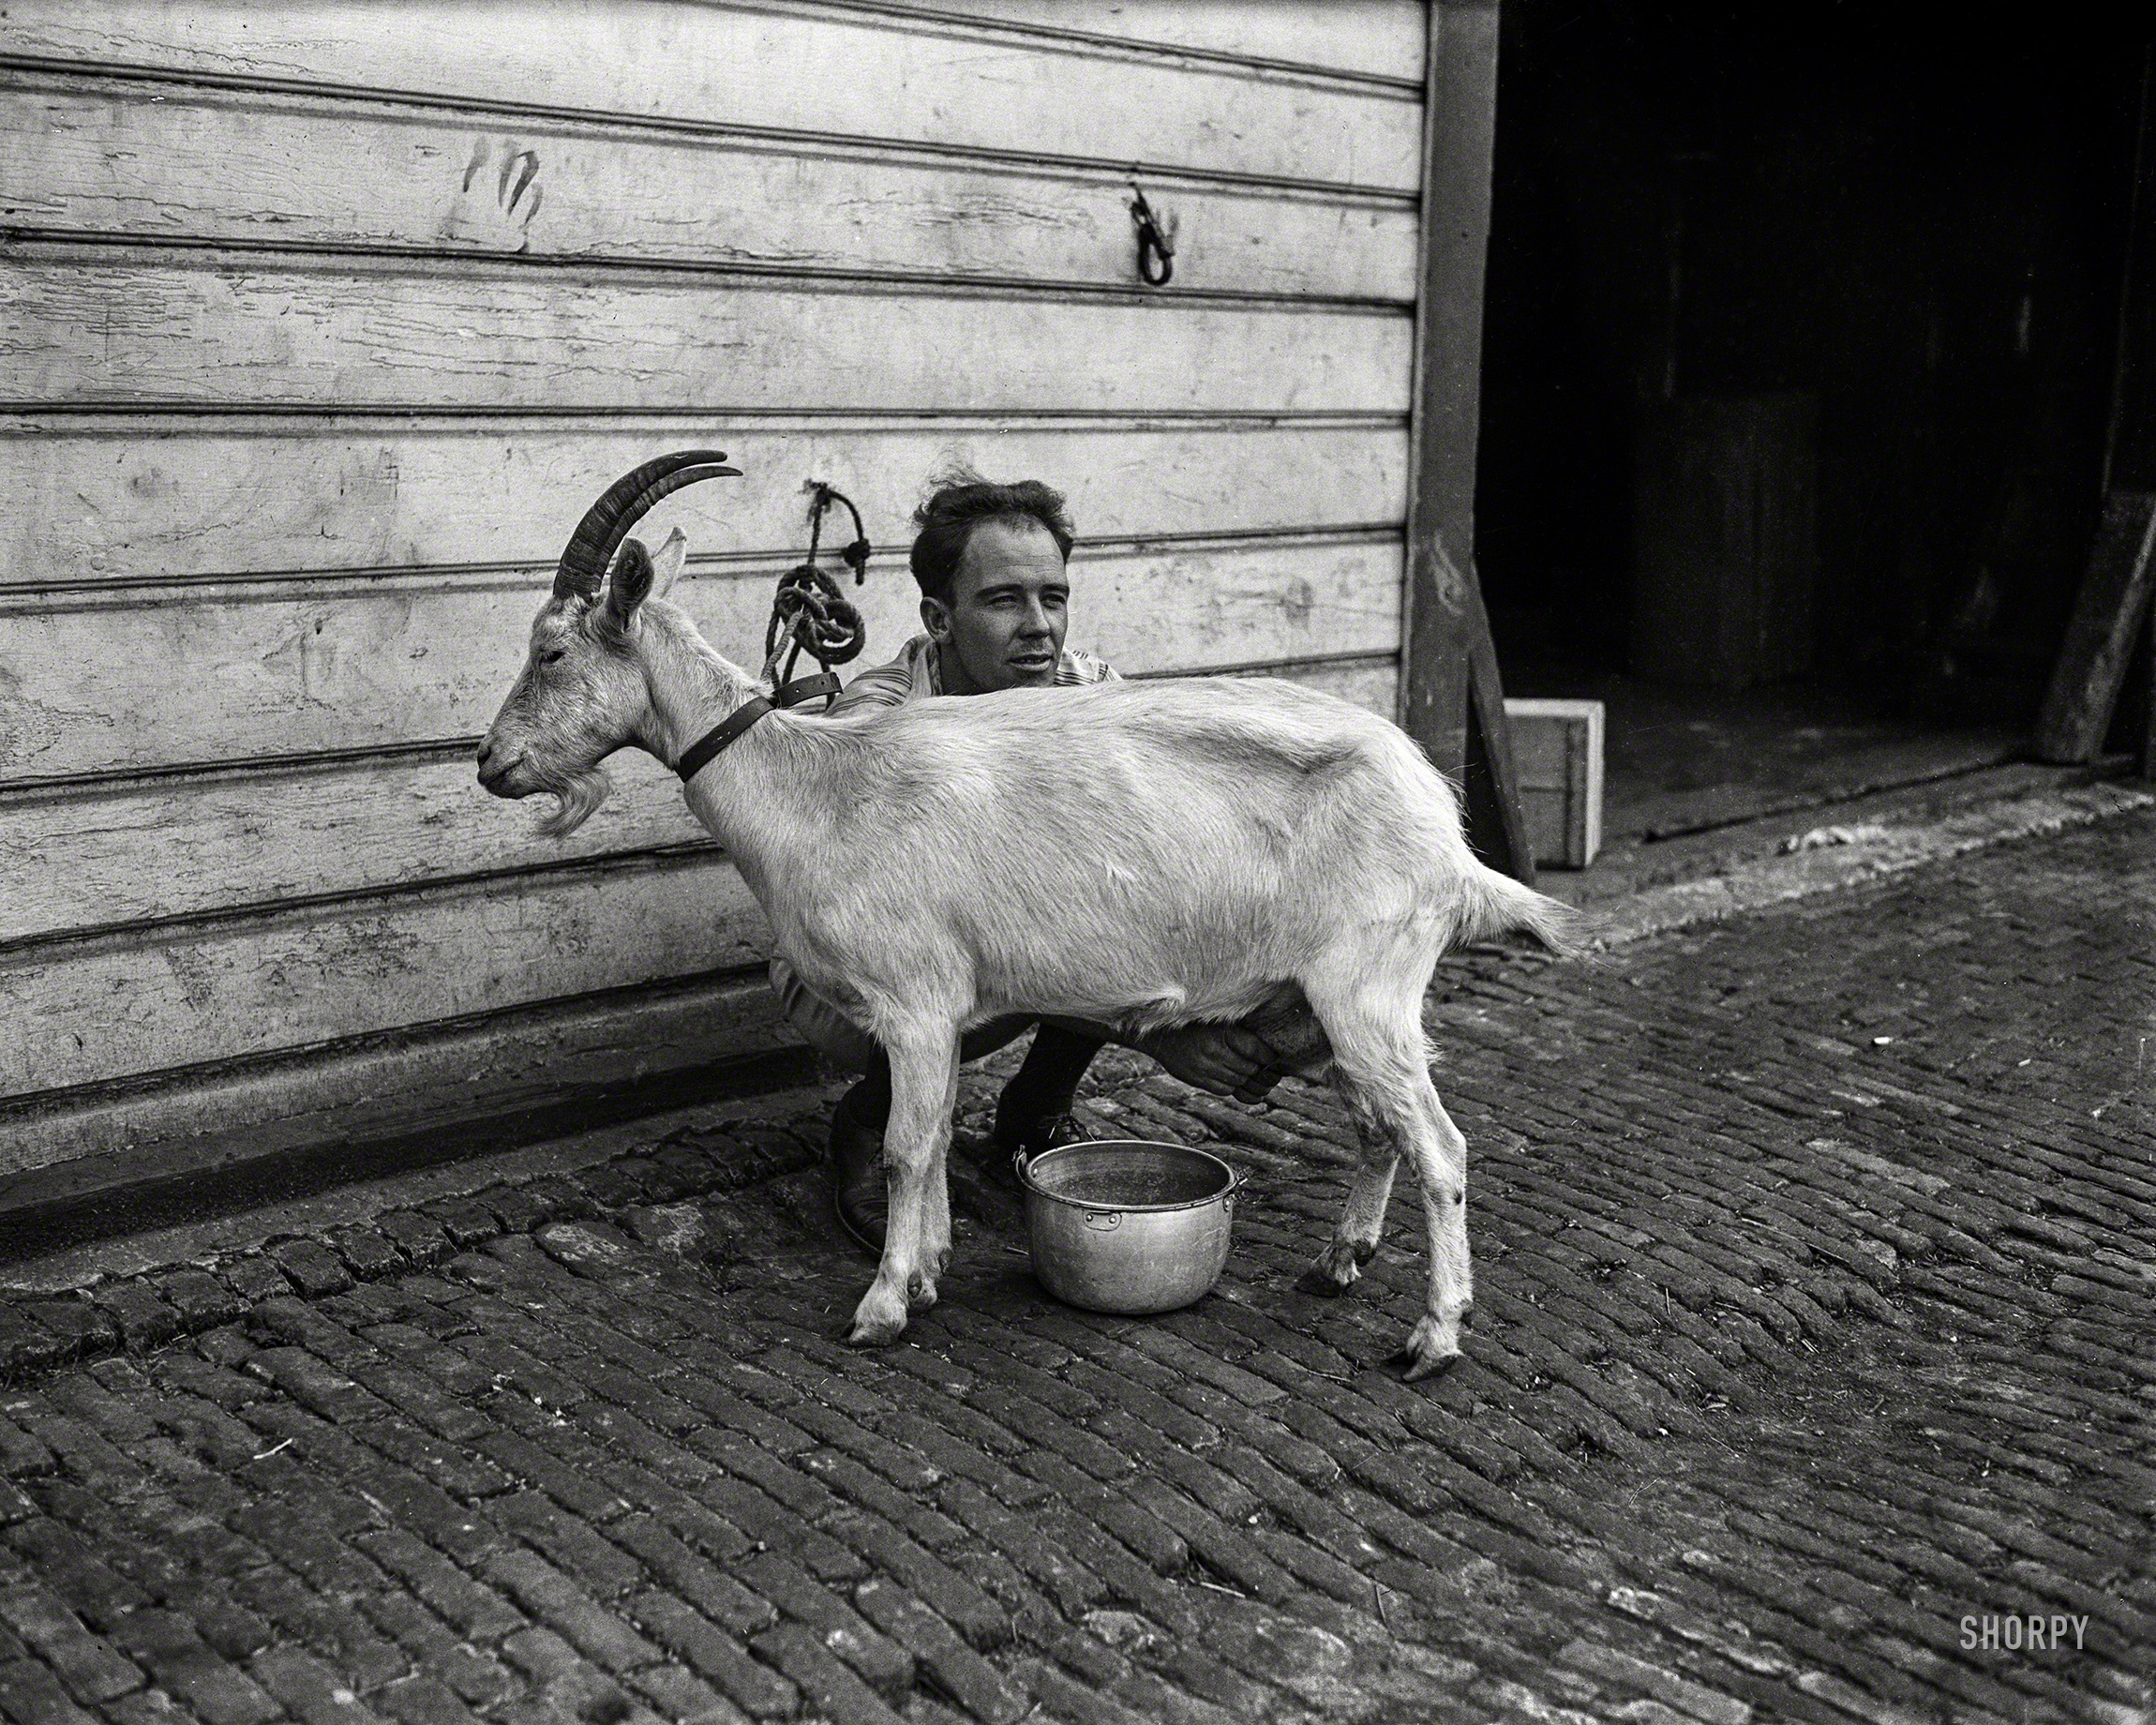 September 1922. Washington, D.C. "Nanny, a Swiss goat owned by Dr. James E. Chamberlain, holds the record of having given seven quarts of milk a day for the past year. The milk is supplied to local hospitals." View full size.